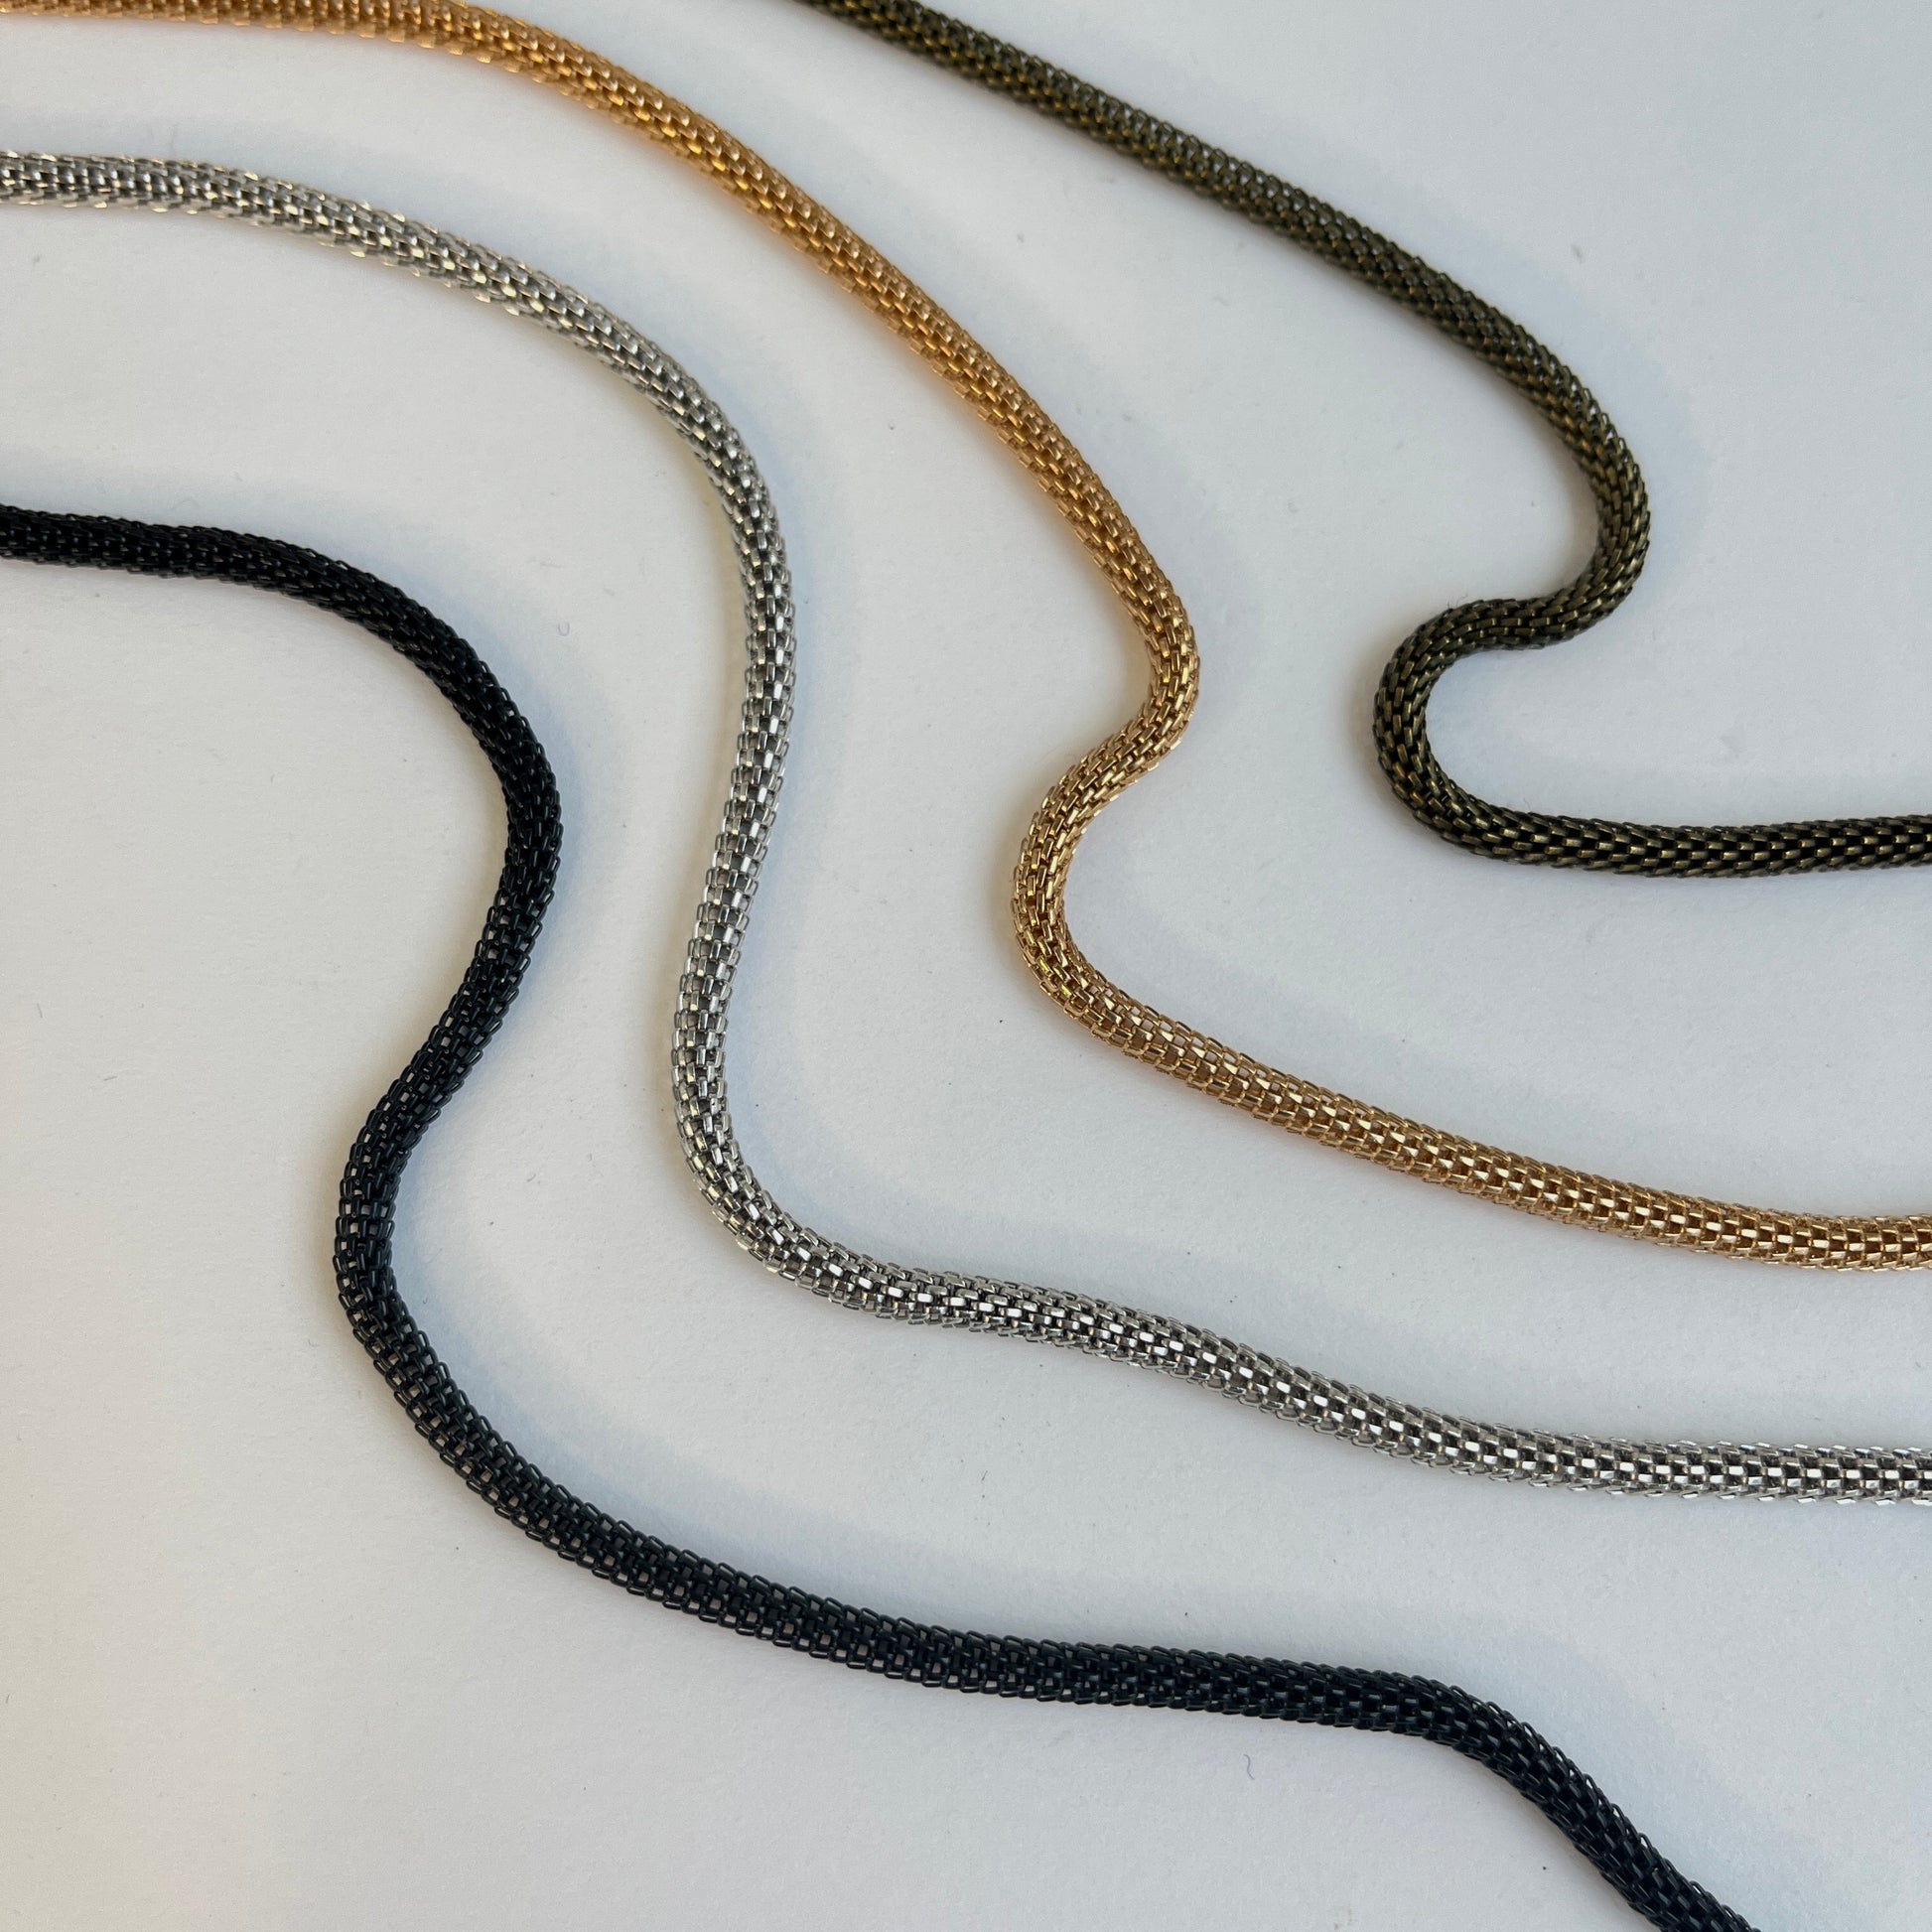 Round Hollow Mesh Chain for jewellery making, bag making, for dress straps and decoration. Nickel free and flexible.